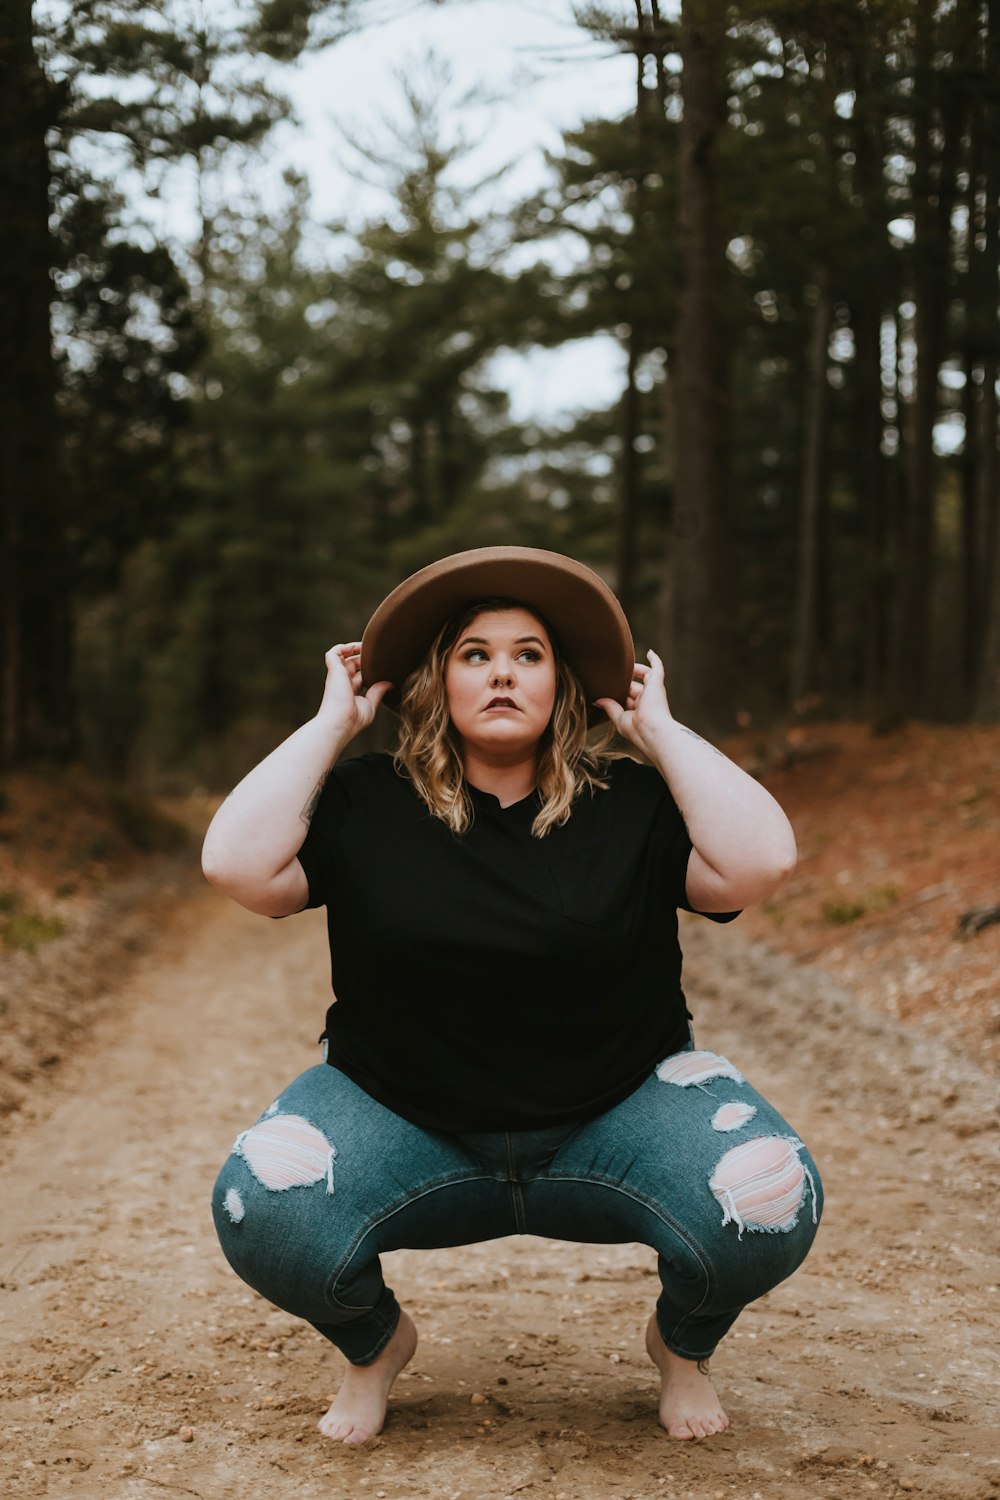 500+ Fat Girl Pictures [HD] | Download Free Images on Unsplash